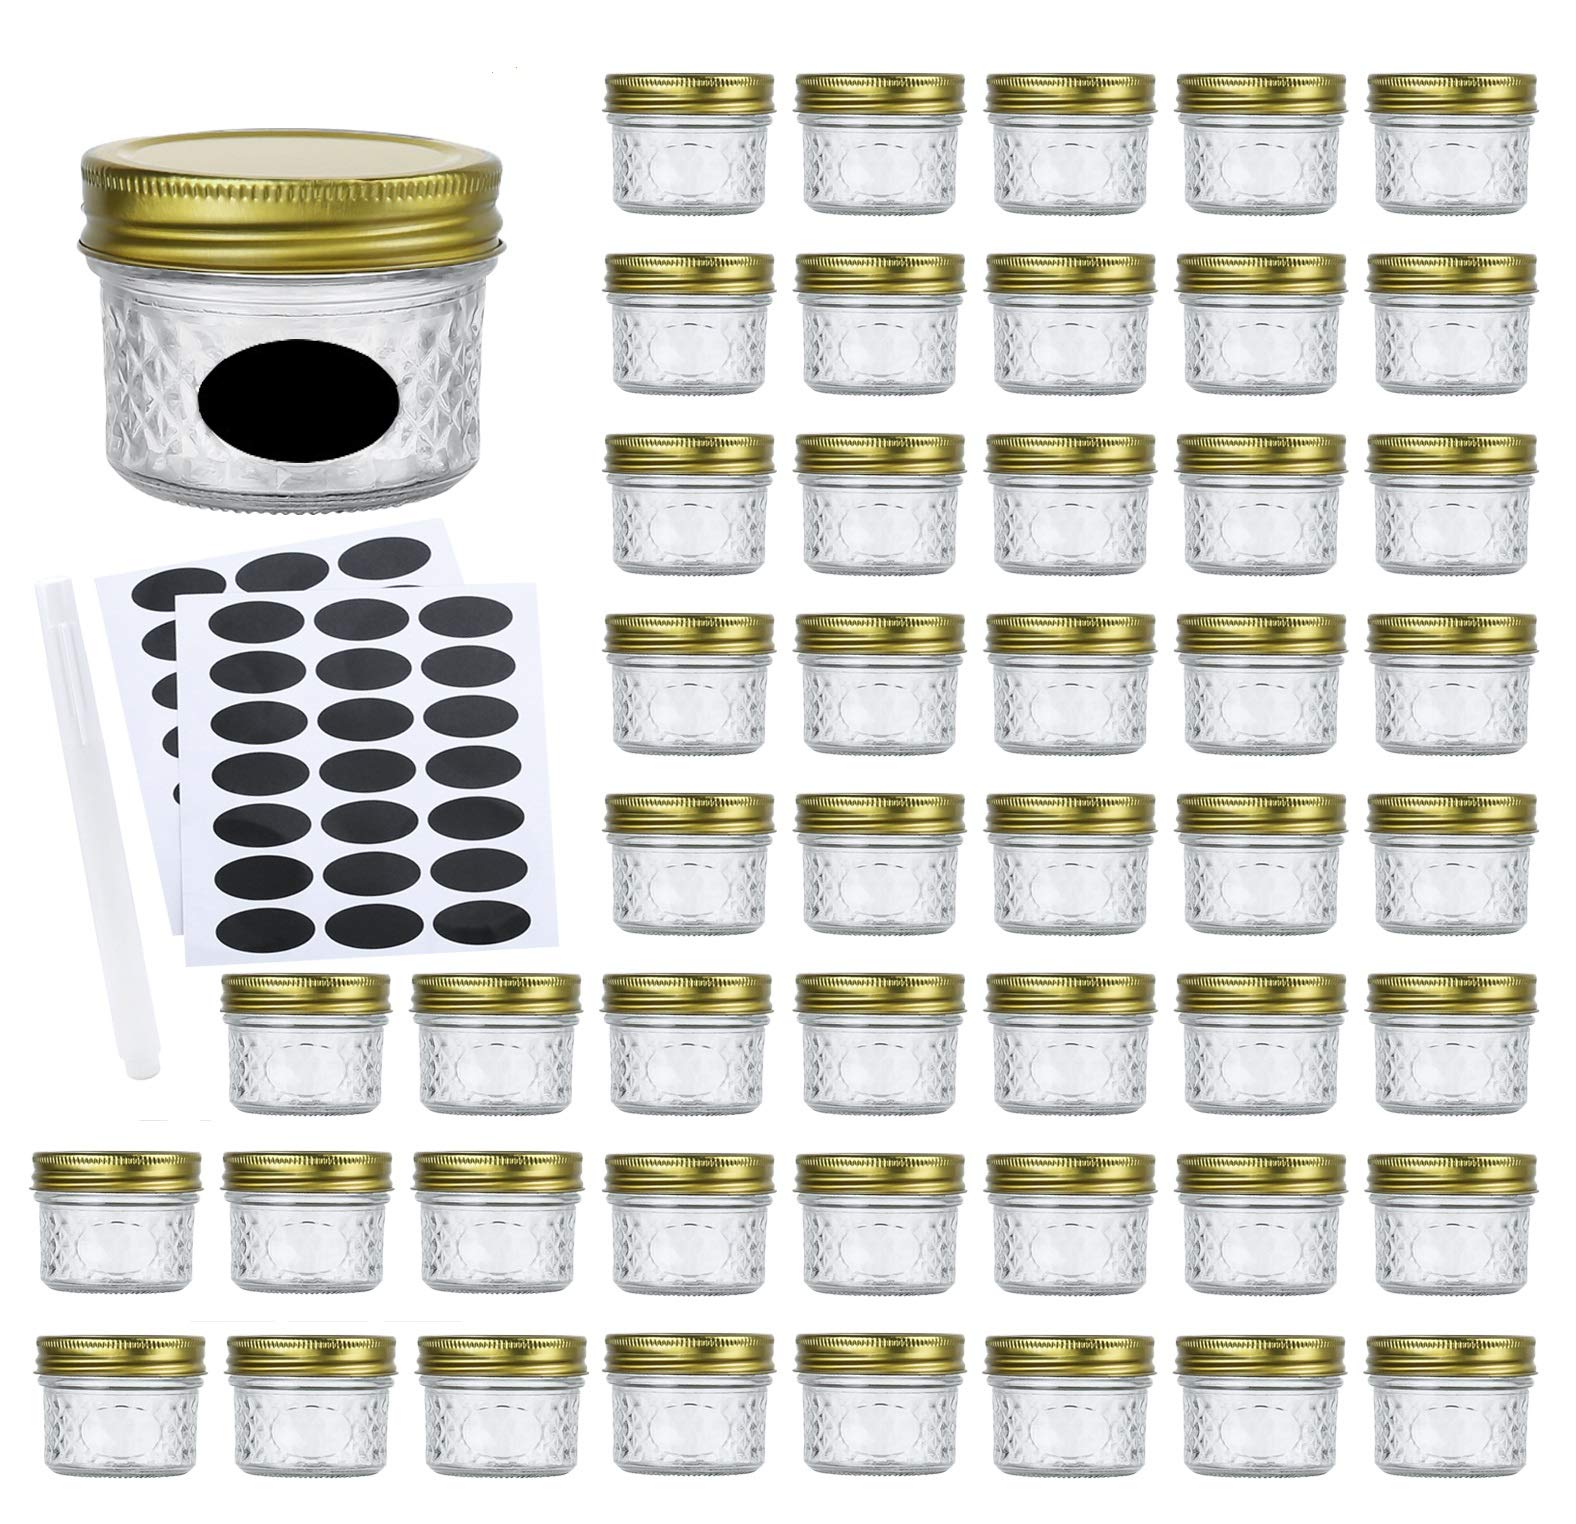 Encheng 4oz Glass Jars With Regular Lids,Mini Wide Mouth Mason Jars,Clear Small Canning Jars With Gold Lids,Canning Jars For Honey,Herbs,Jam,Jelly,...